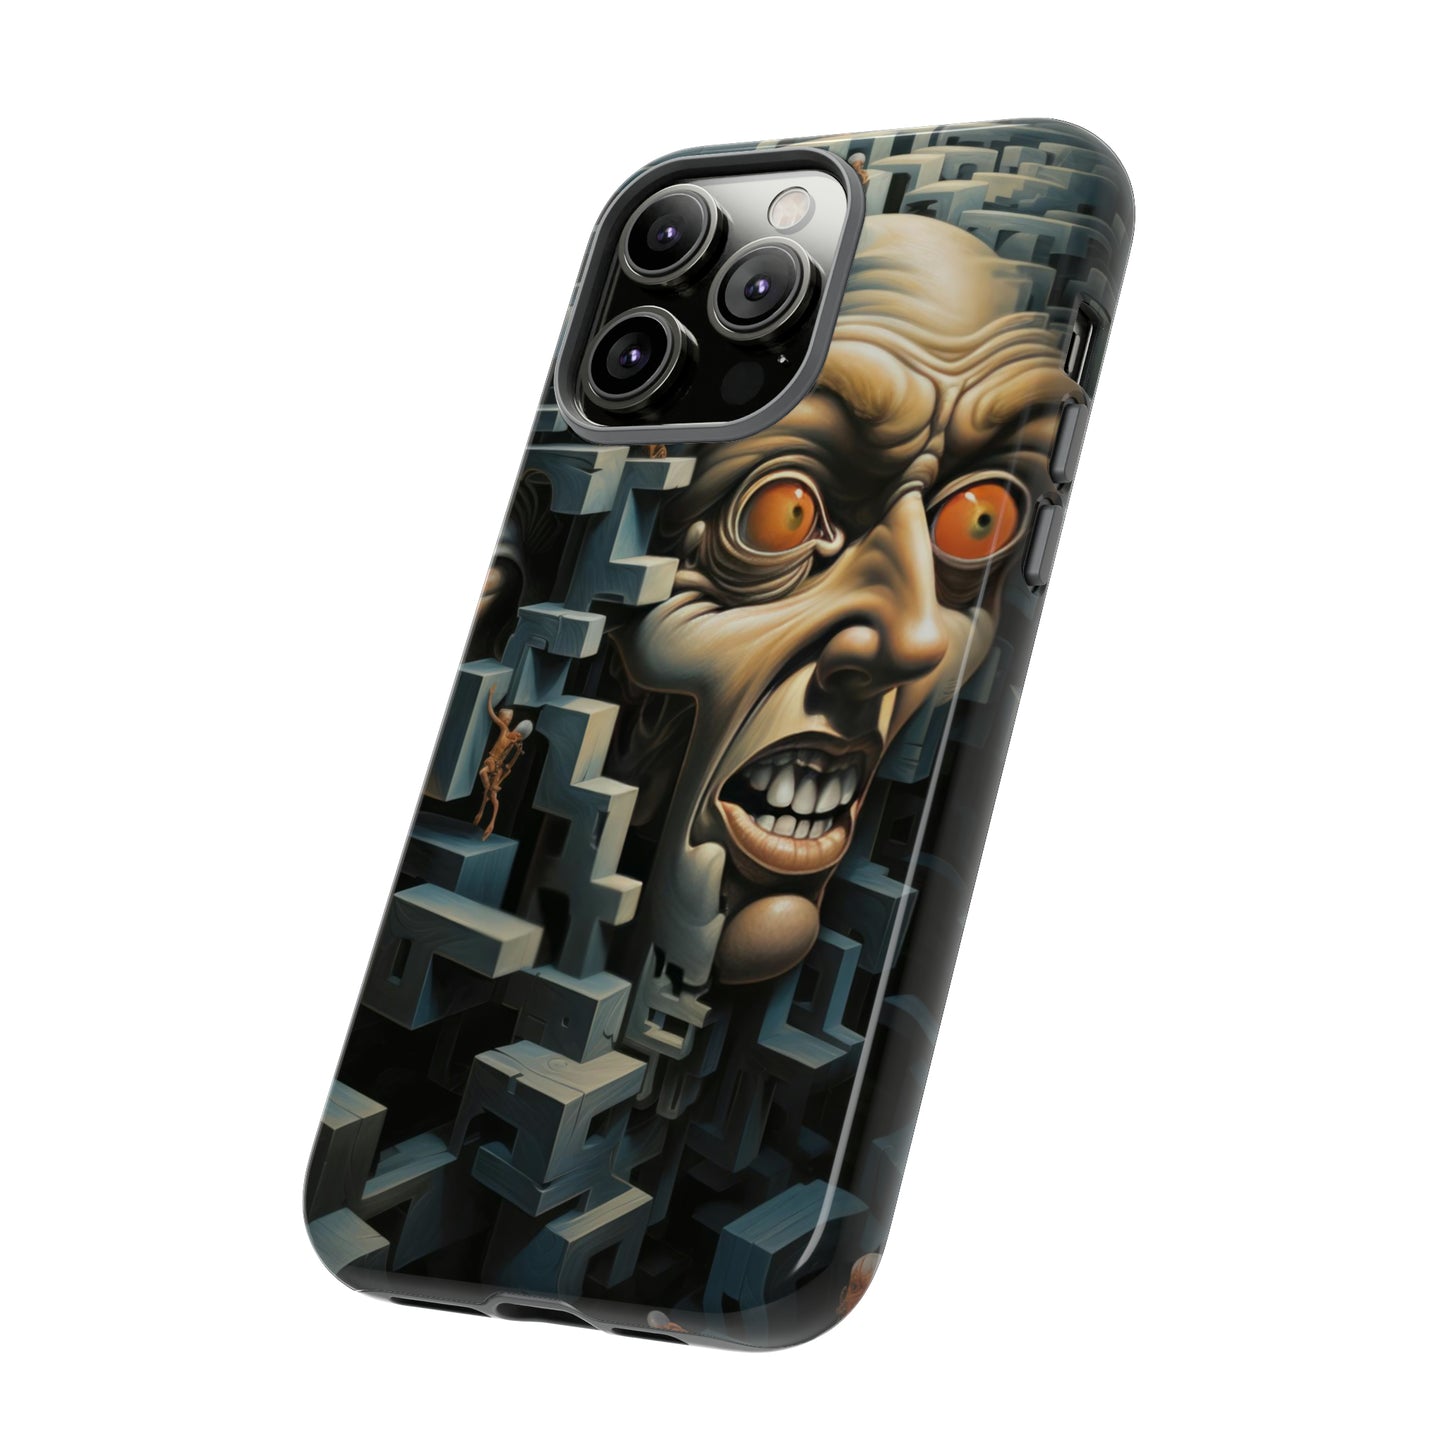 Surreal Labyrinth Entrapment - Puzzling Face Design for iPhone, Samsung, Pixel